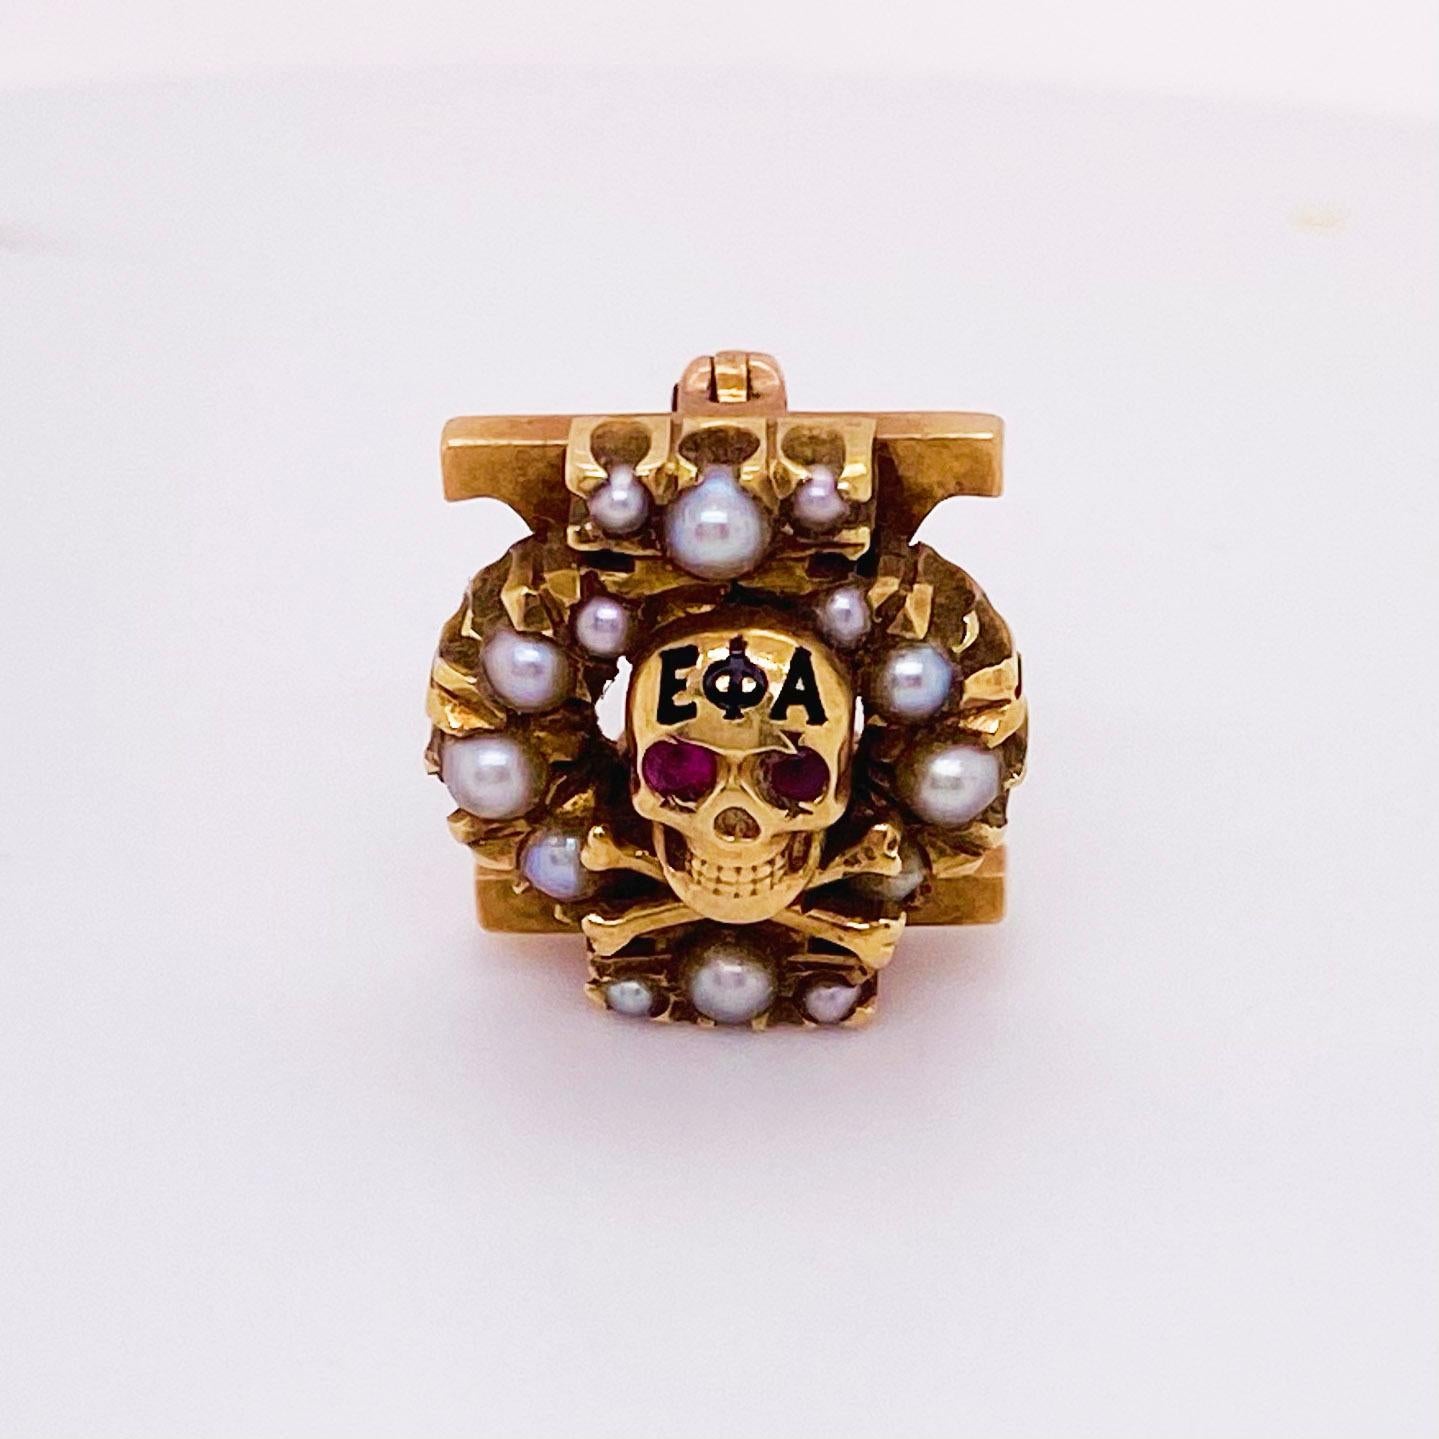 The details for this beautiful brooch is listed below:
Metal Quality: 10k Yellow Gold 
Broach Shape: 
Broach Measurements: 11.7 mm 
Gemstone: Pearl 
Gemstone Shape: round 
This sorority pin is for the Chi Omega and is a skull with ruby eyes and seed